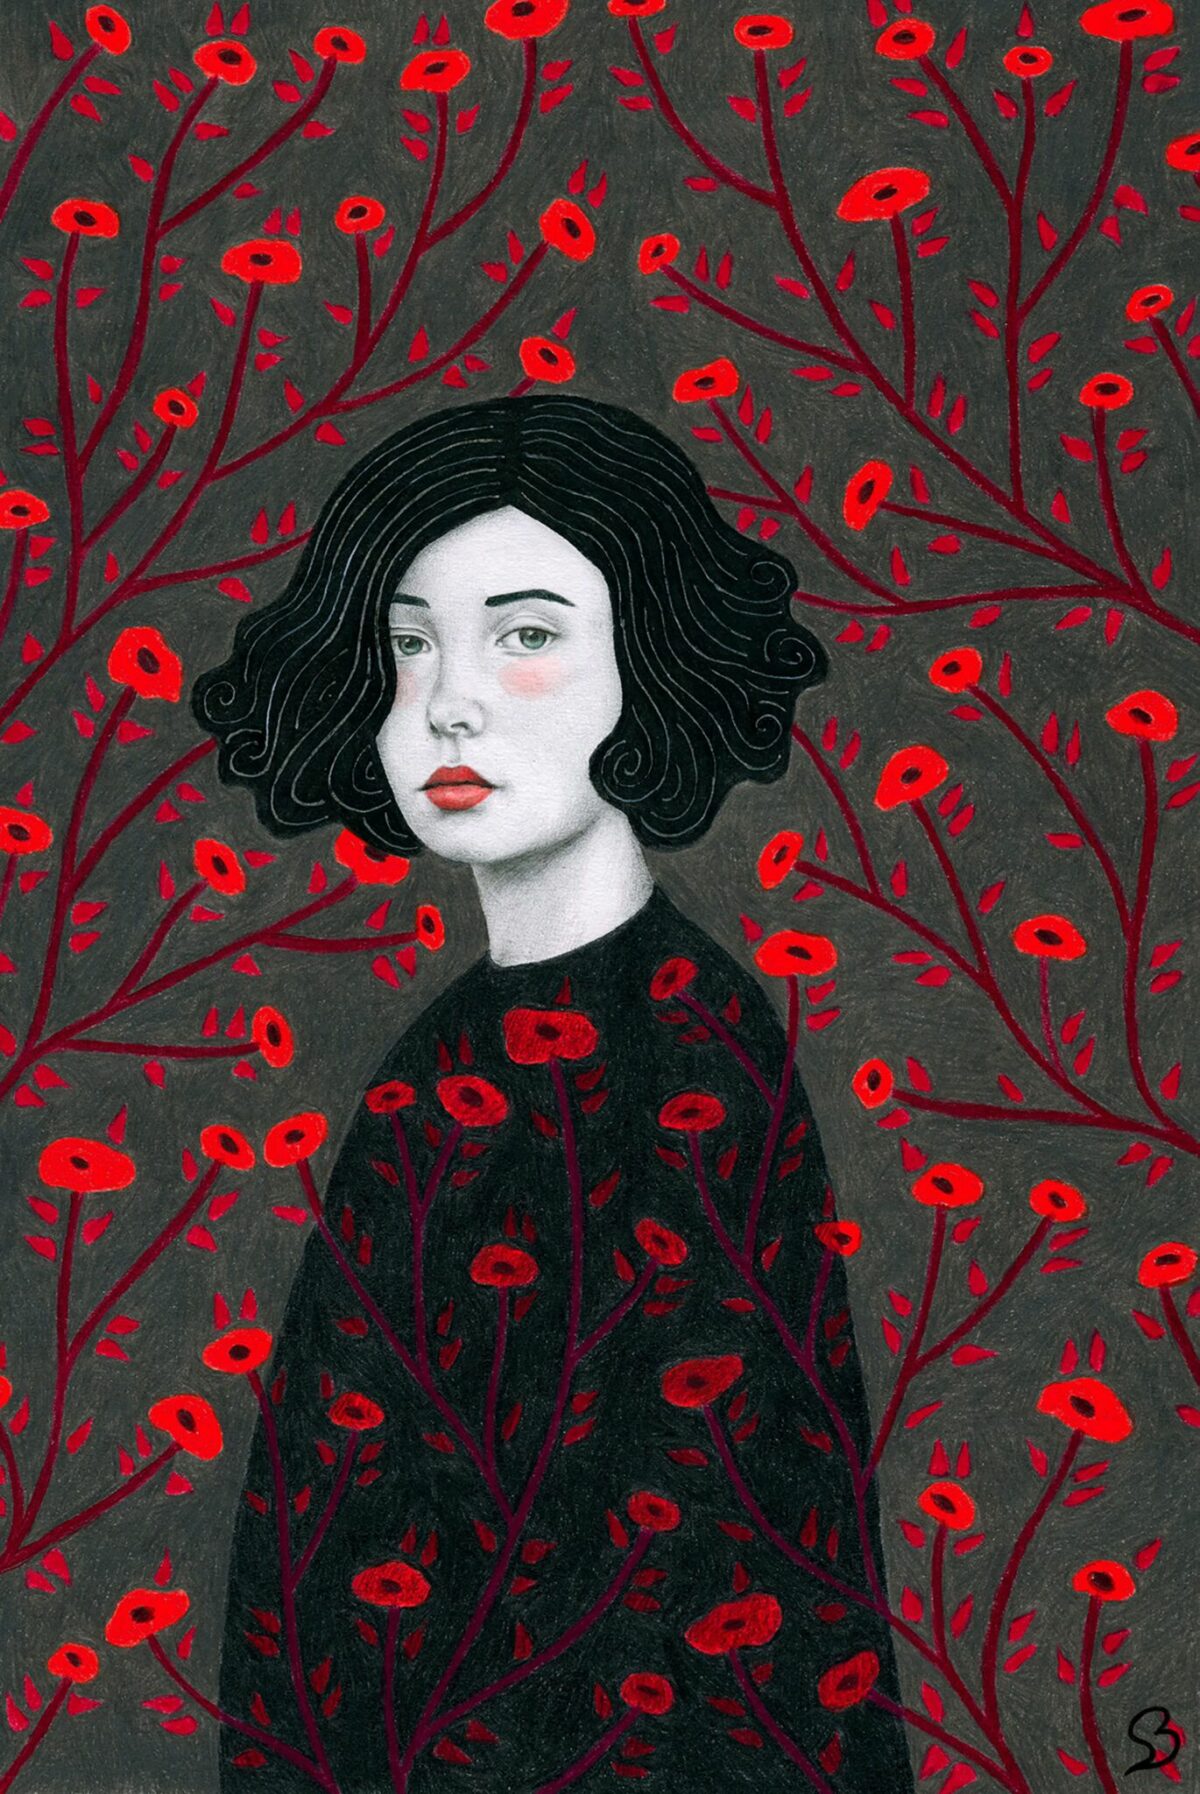 Gorgeous Female Portraits Decorated With Abstract And Floral Patterns By Sofia Bonati 15